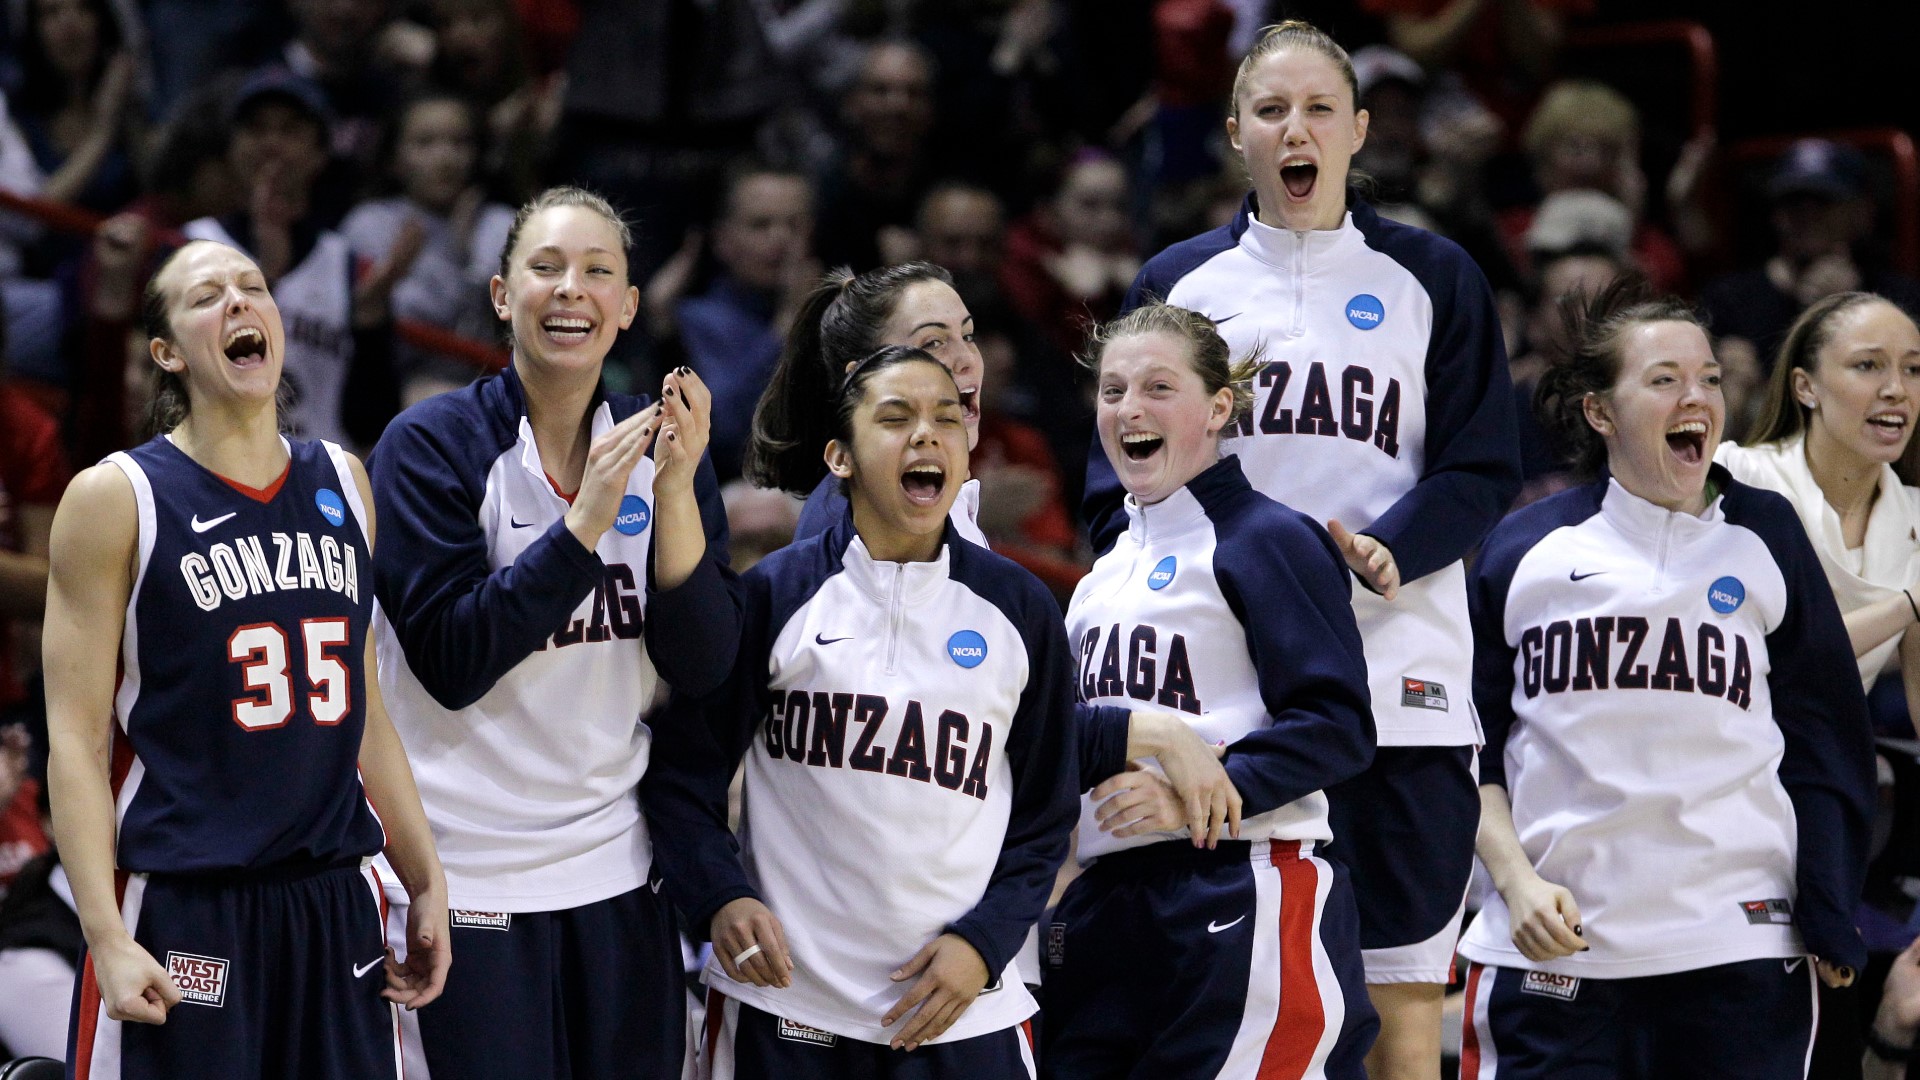 The win advanced them to the Elite Eight, which is still the furthest the Gonzaga women have gotten in the tournament.